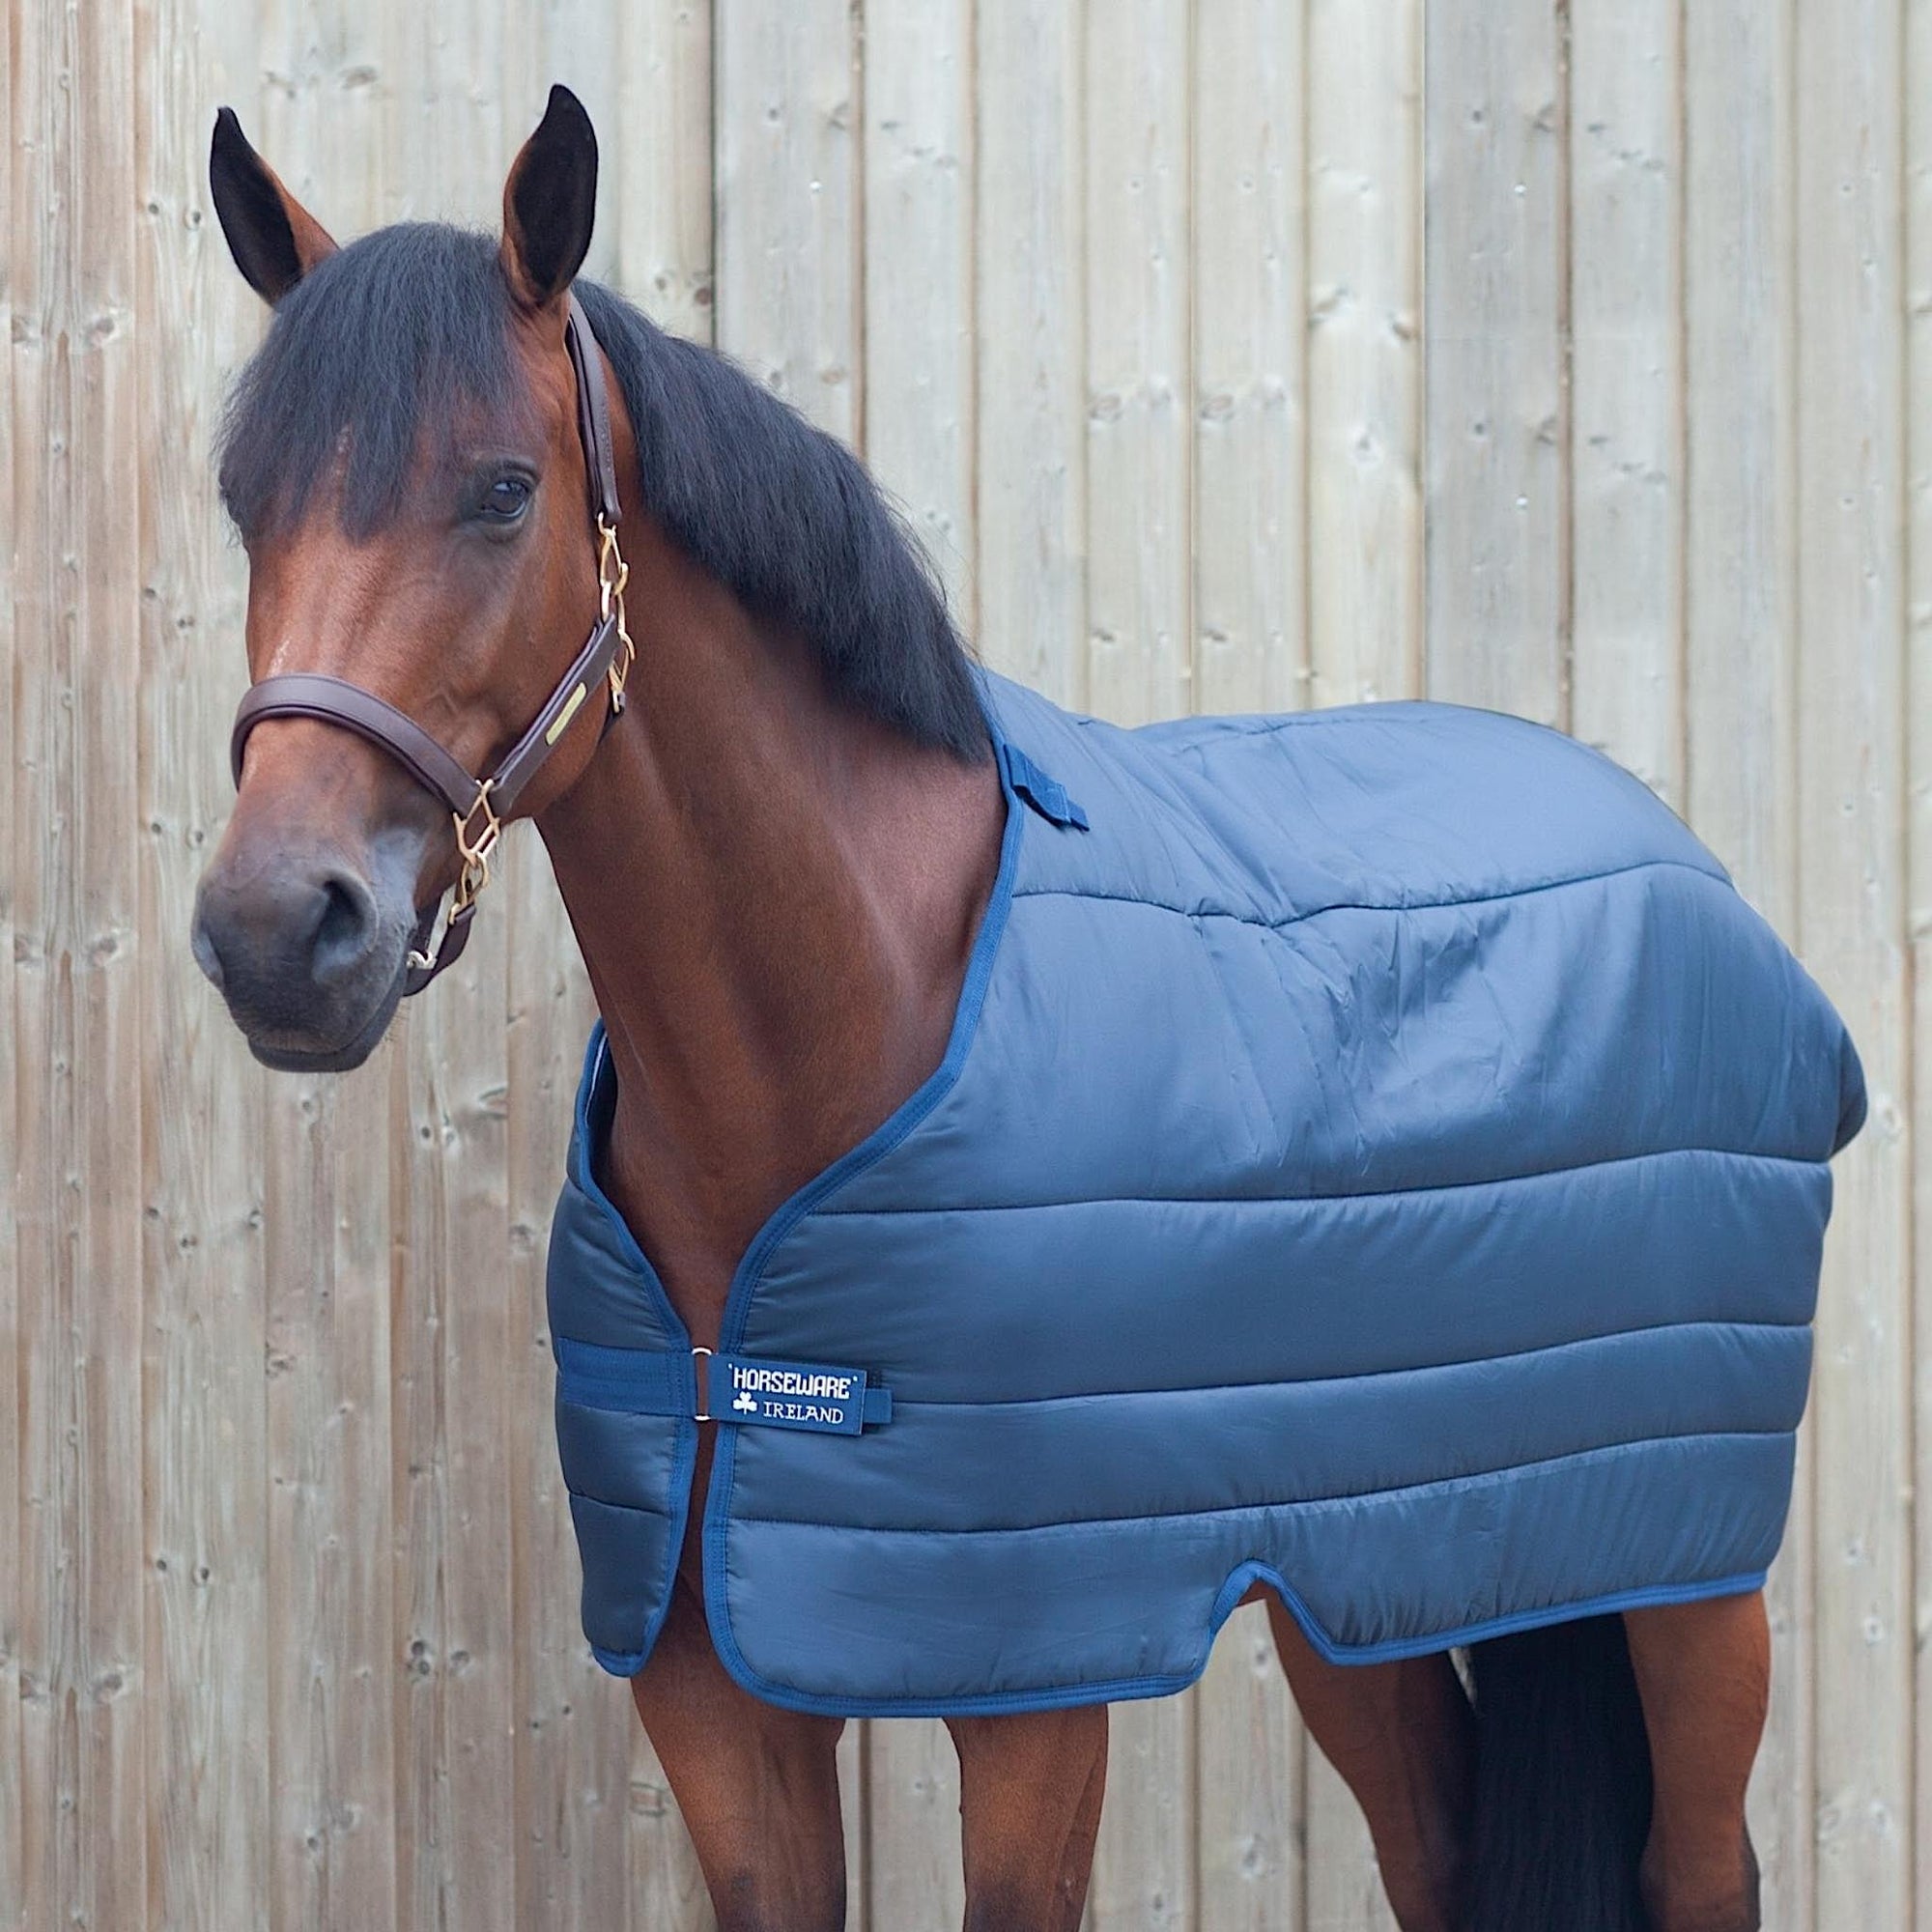 Bay horse wearing navy liner with navy details including trim.